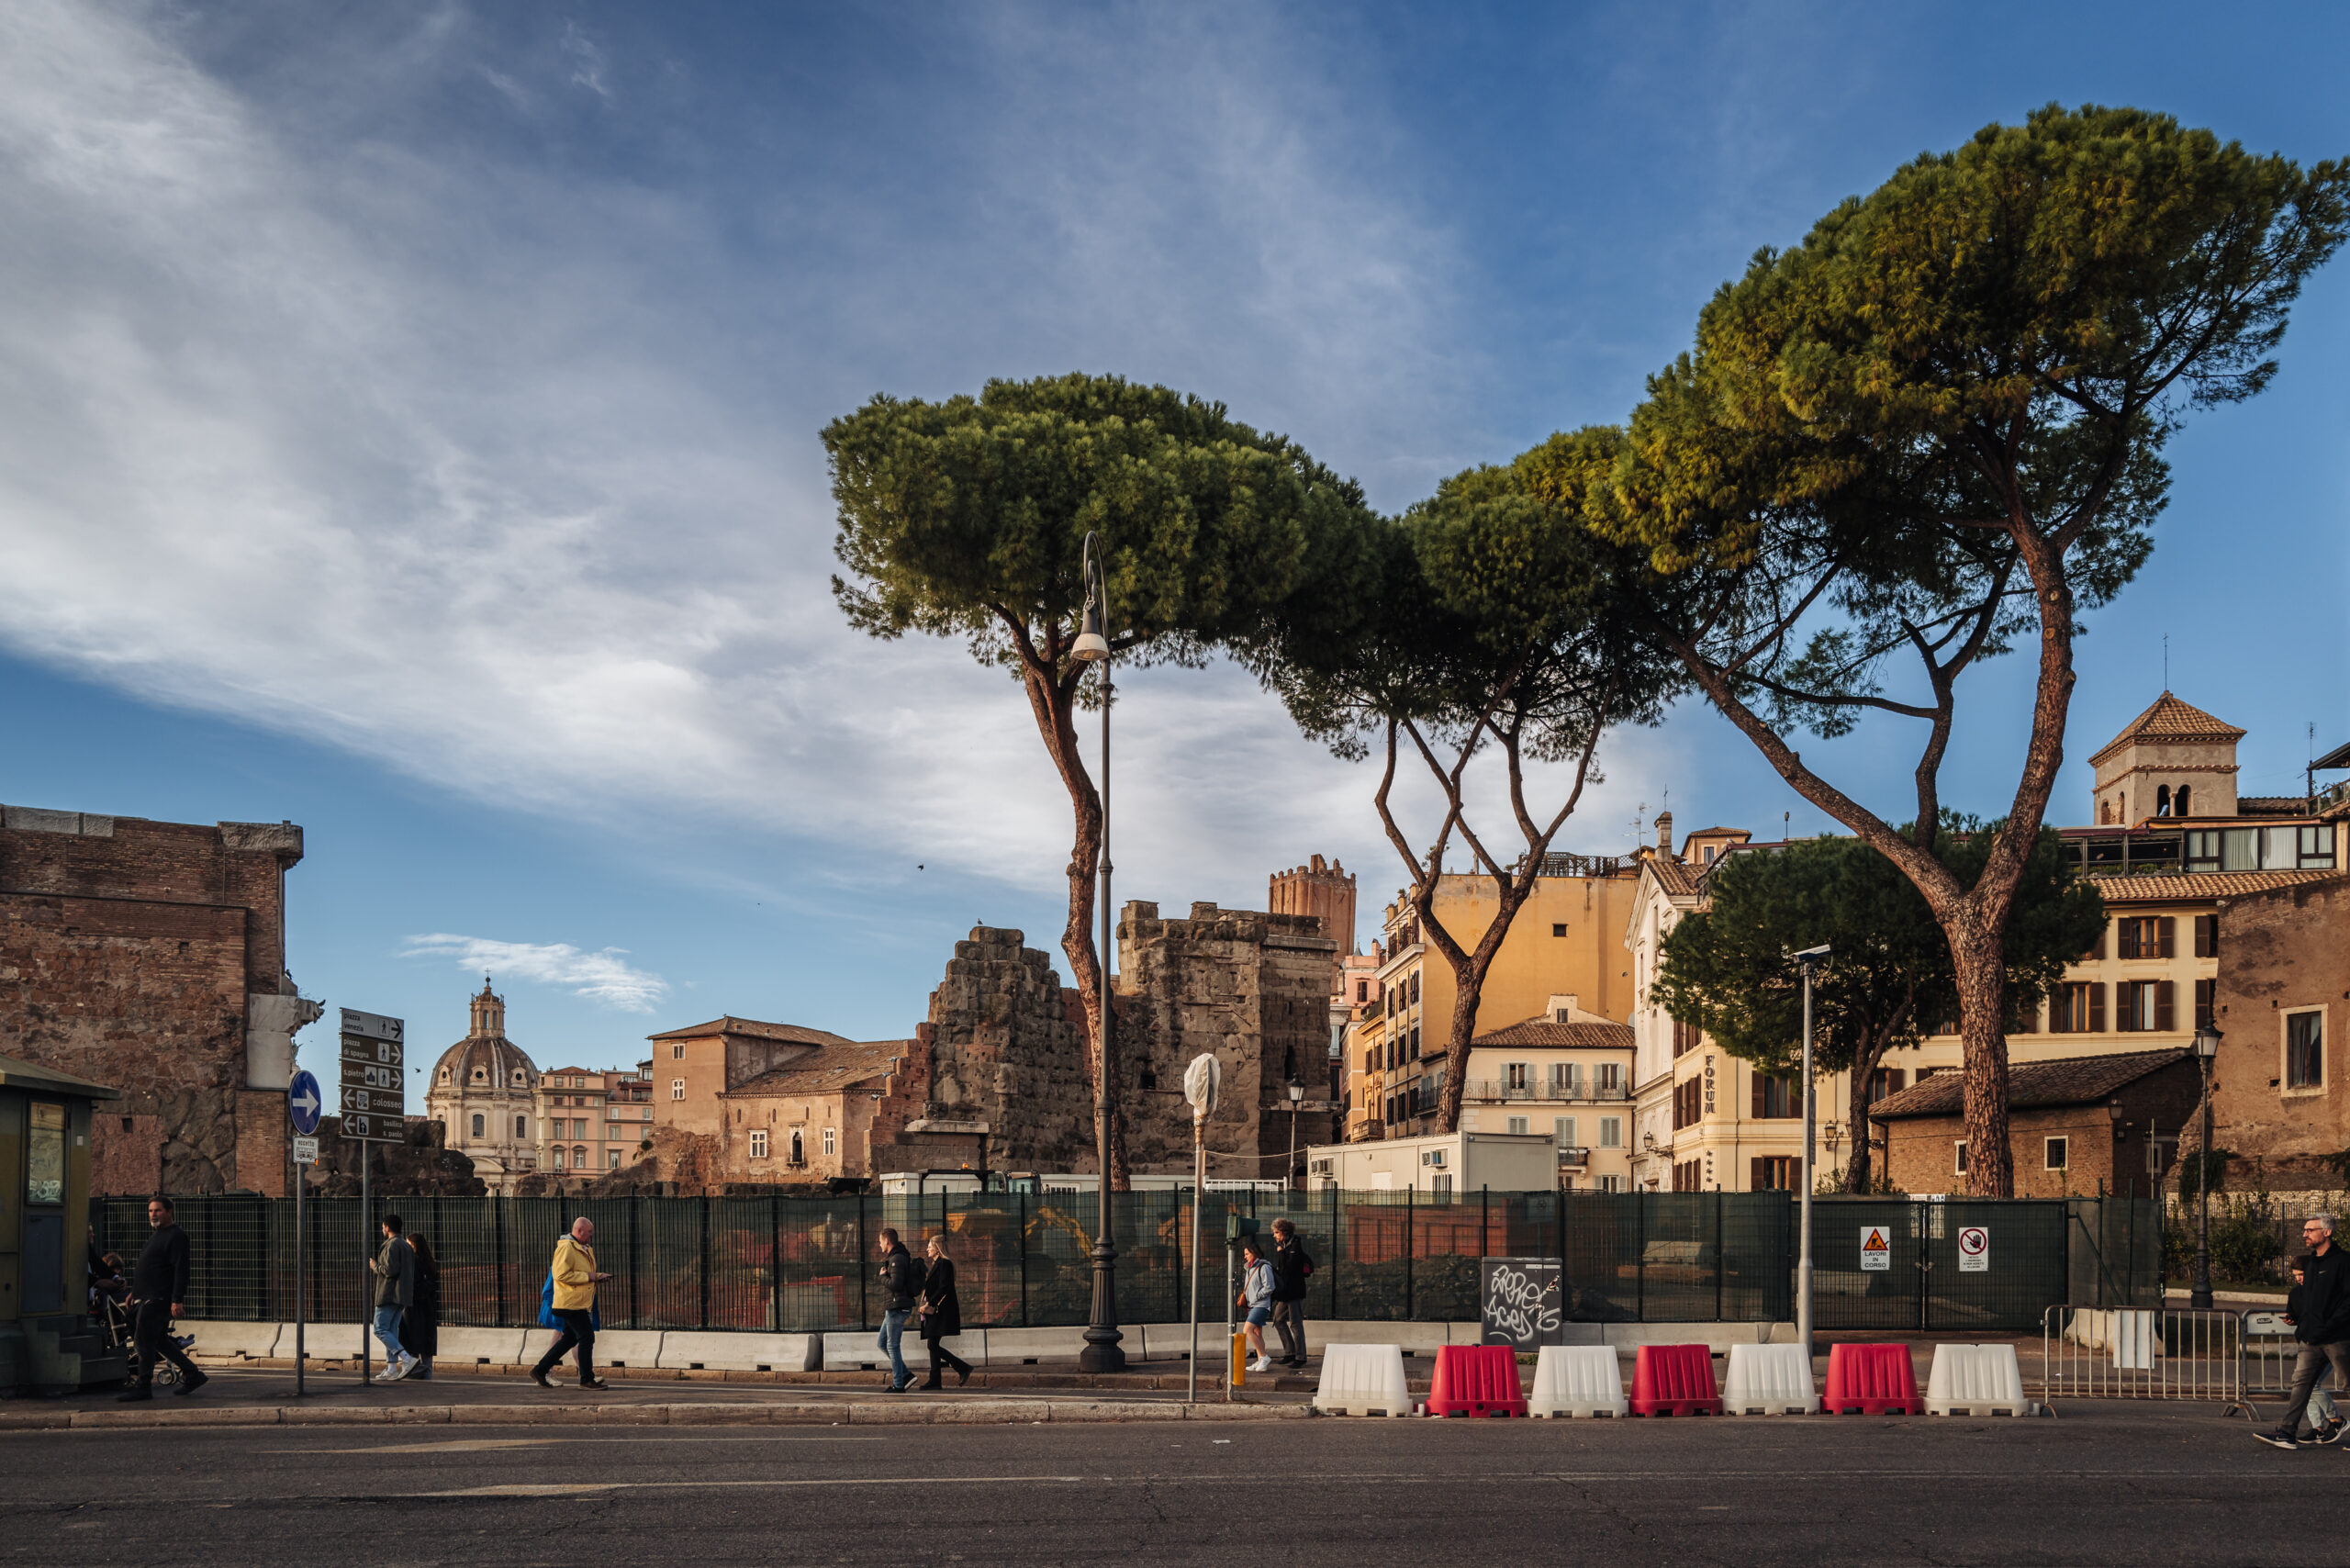 Rome, Italy- November 2022: The beautiful ruins and architecture